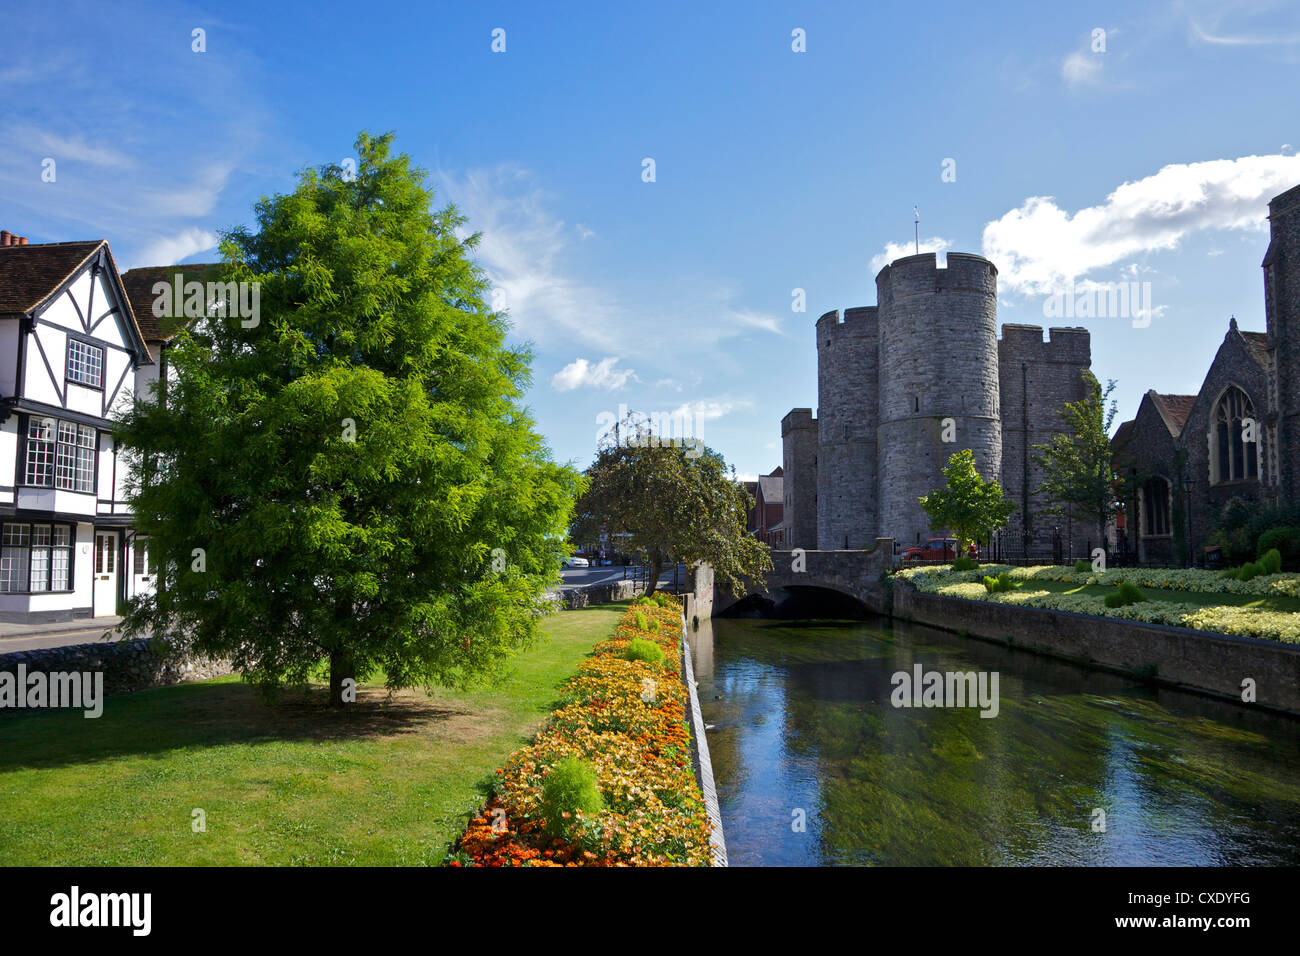 Westgate medieval gatehouse and gardens, with bridge over the River Stour, Canterbury, Kent, England, United Kingdom, Europe Stock Photo